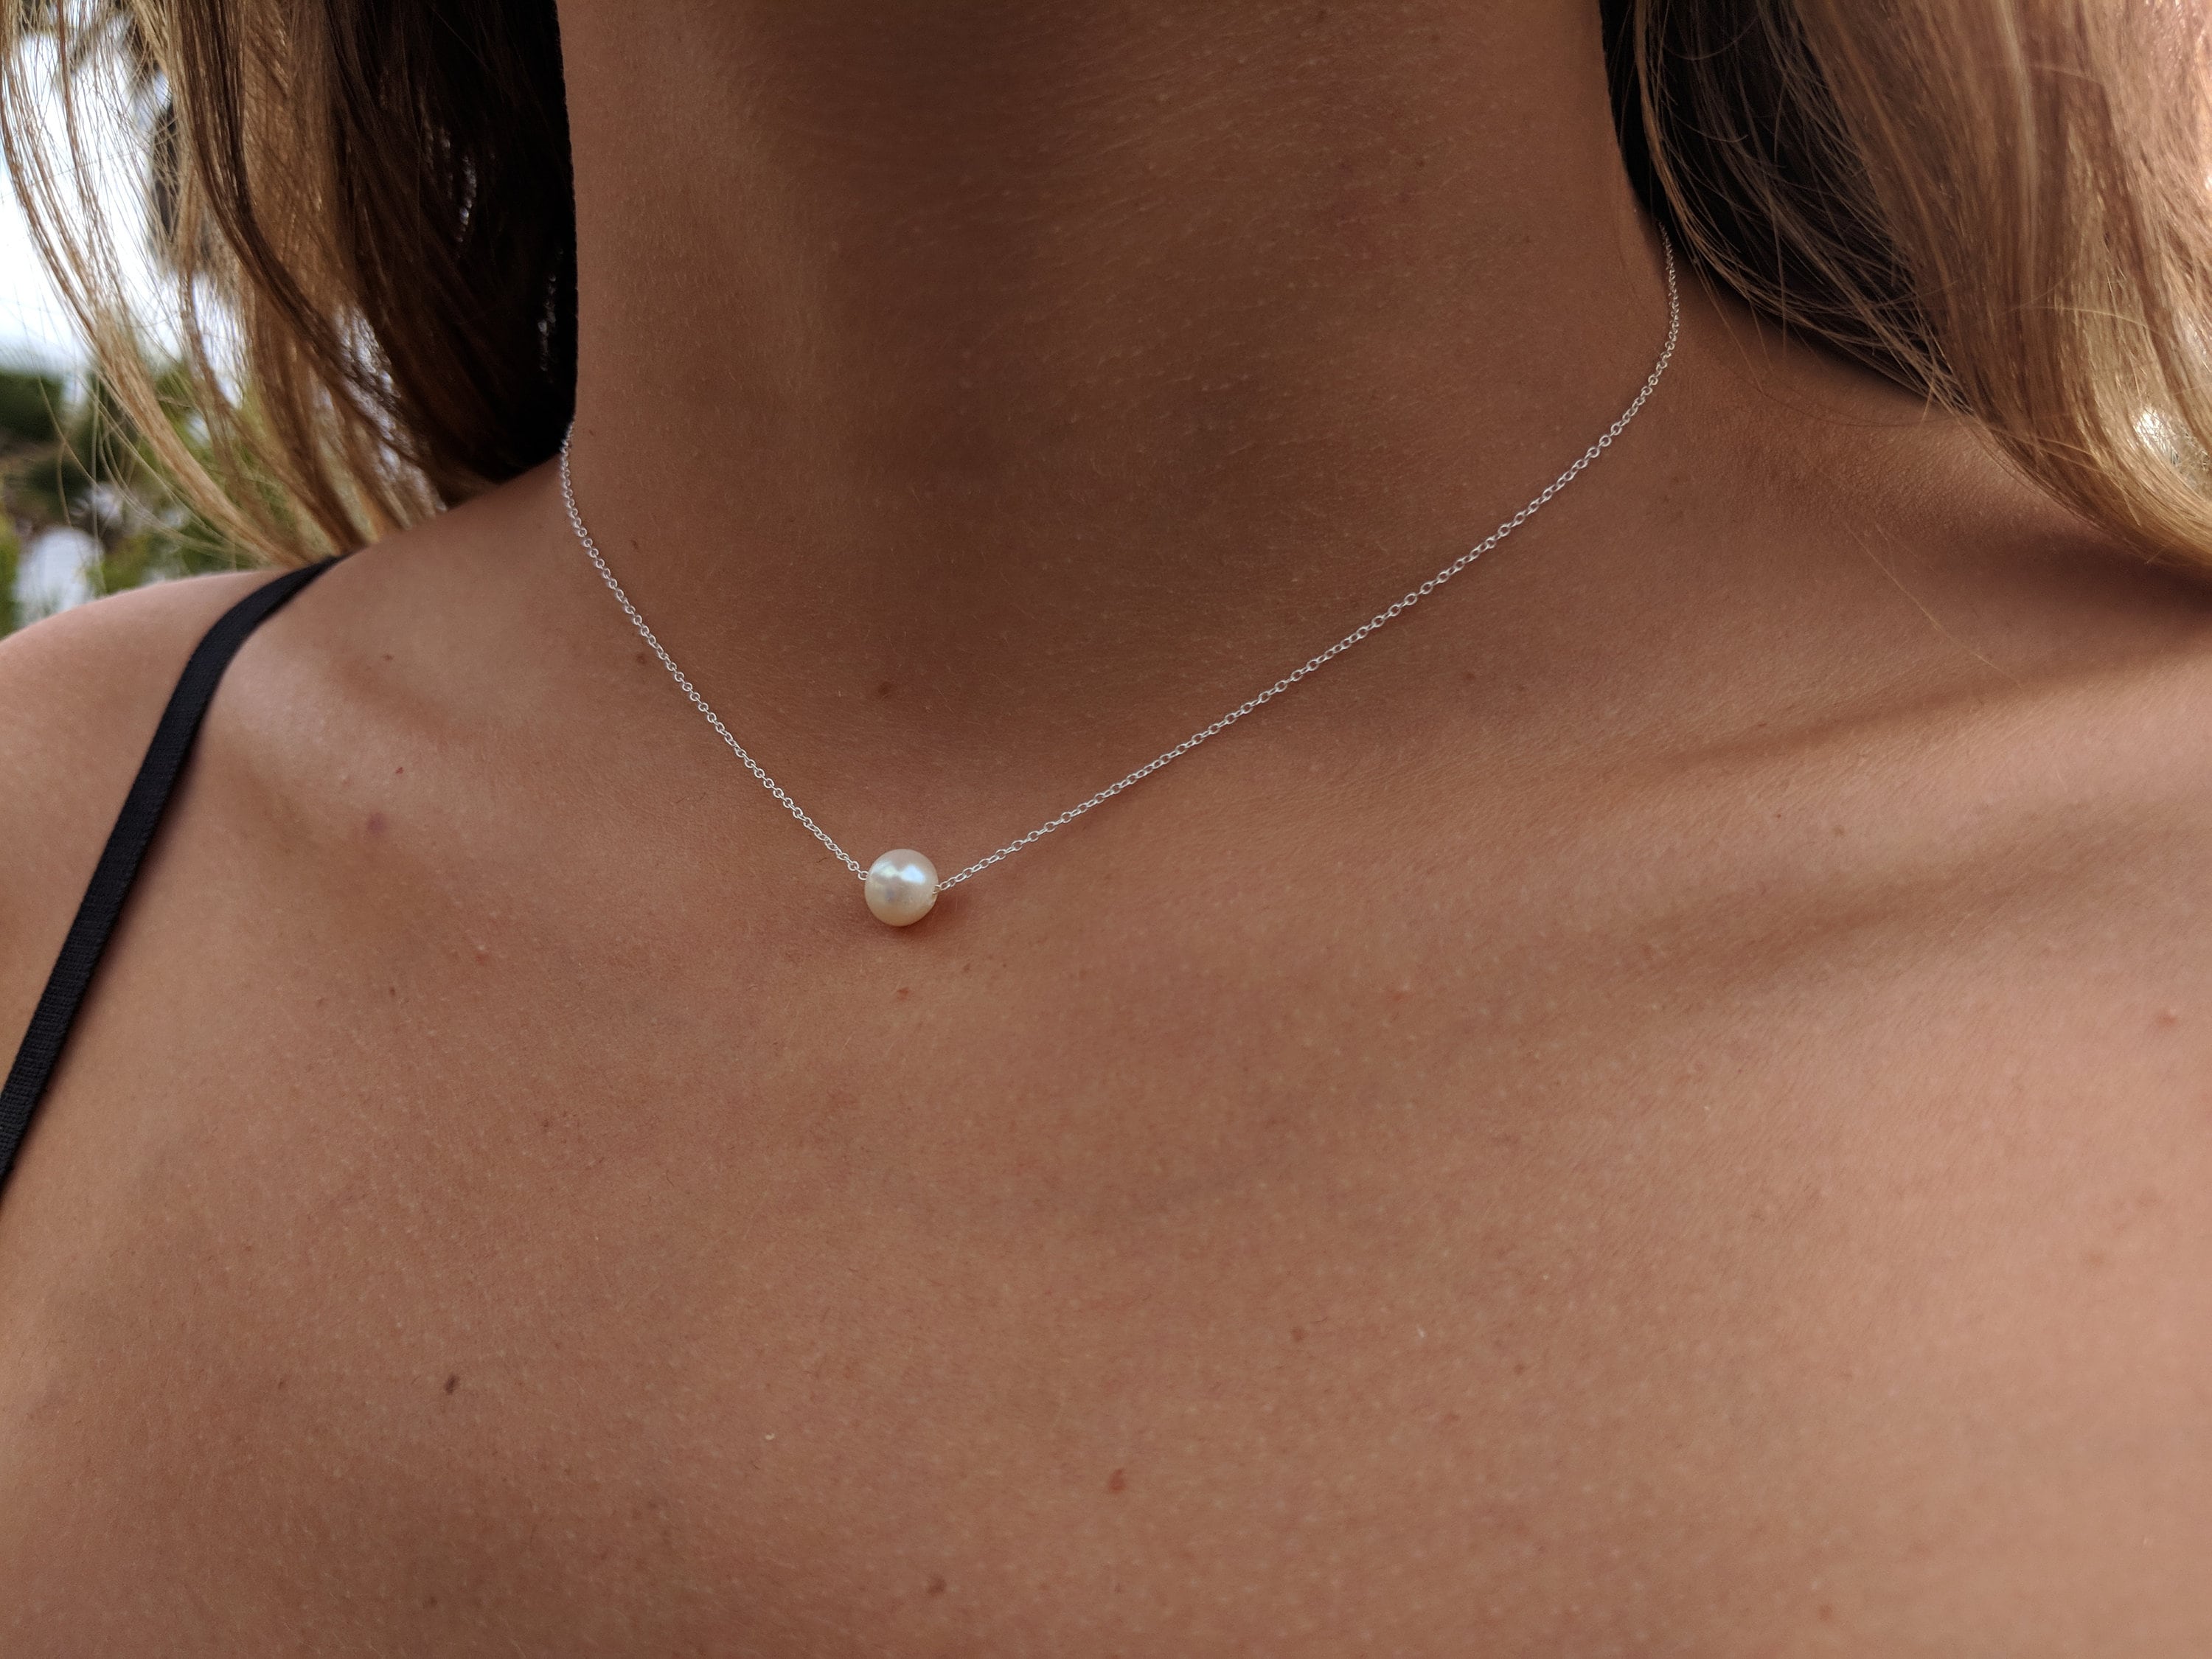 Details about   Floating Pearl Necklace Single Pearl Necklace 925 Sterling Silver